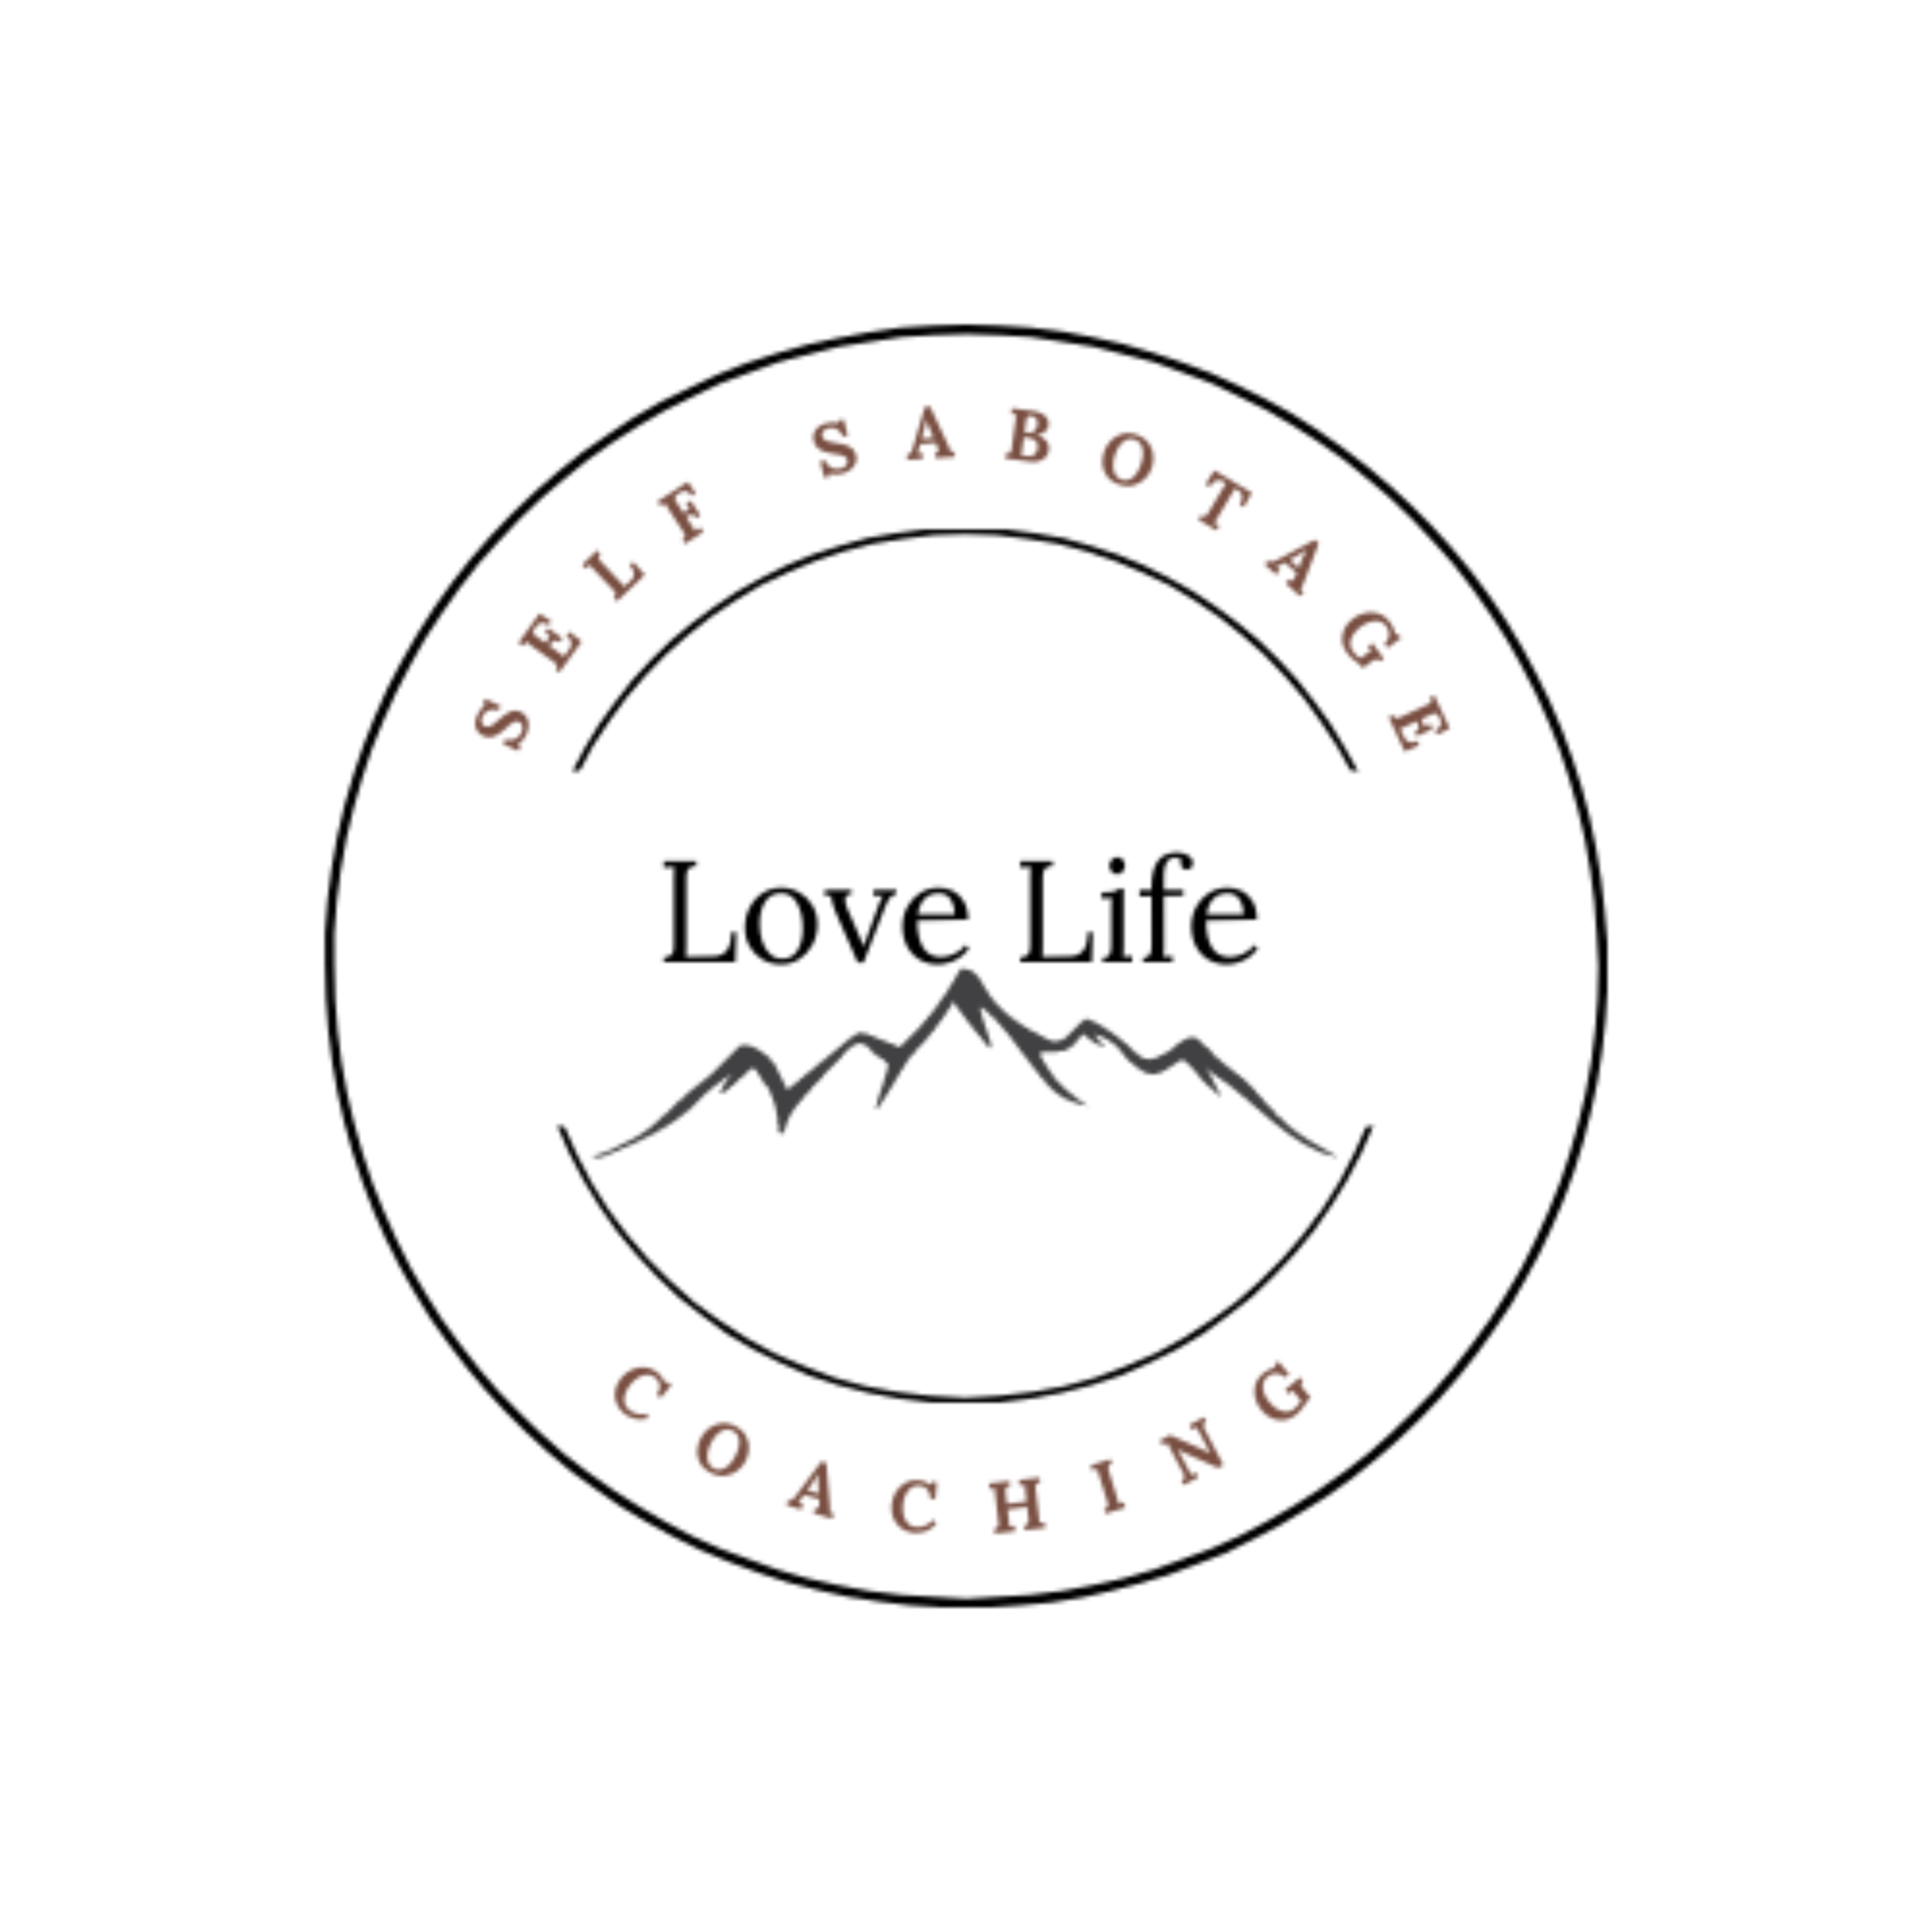 Official Love Life Logo Enlarged